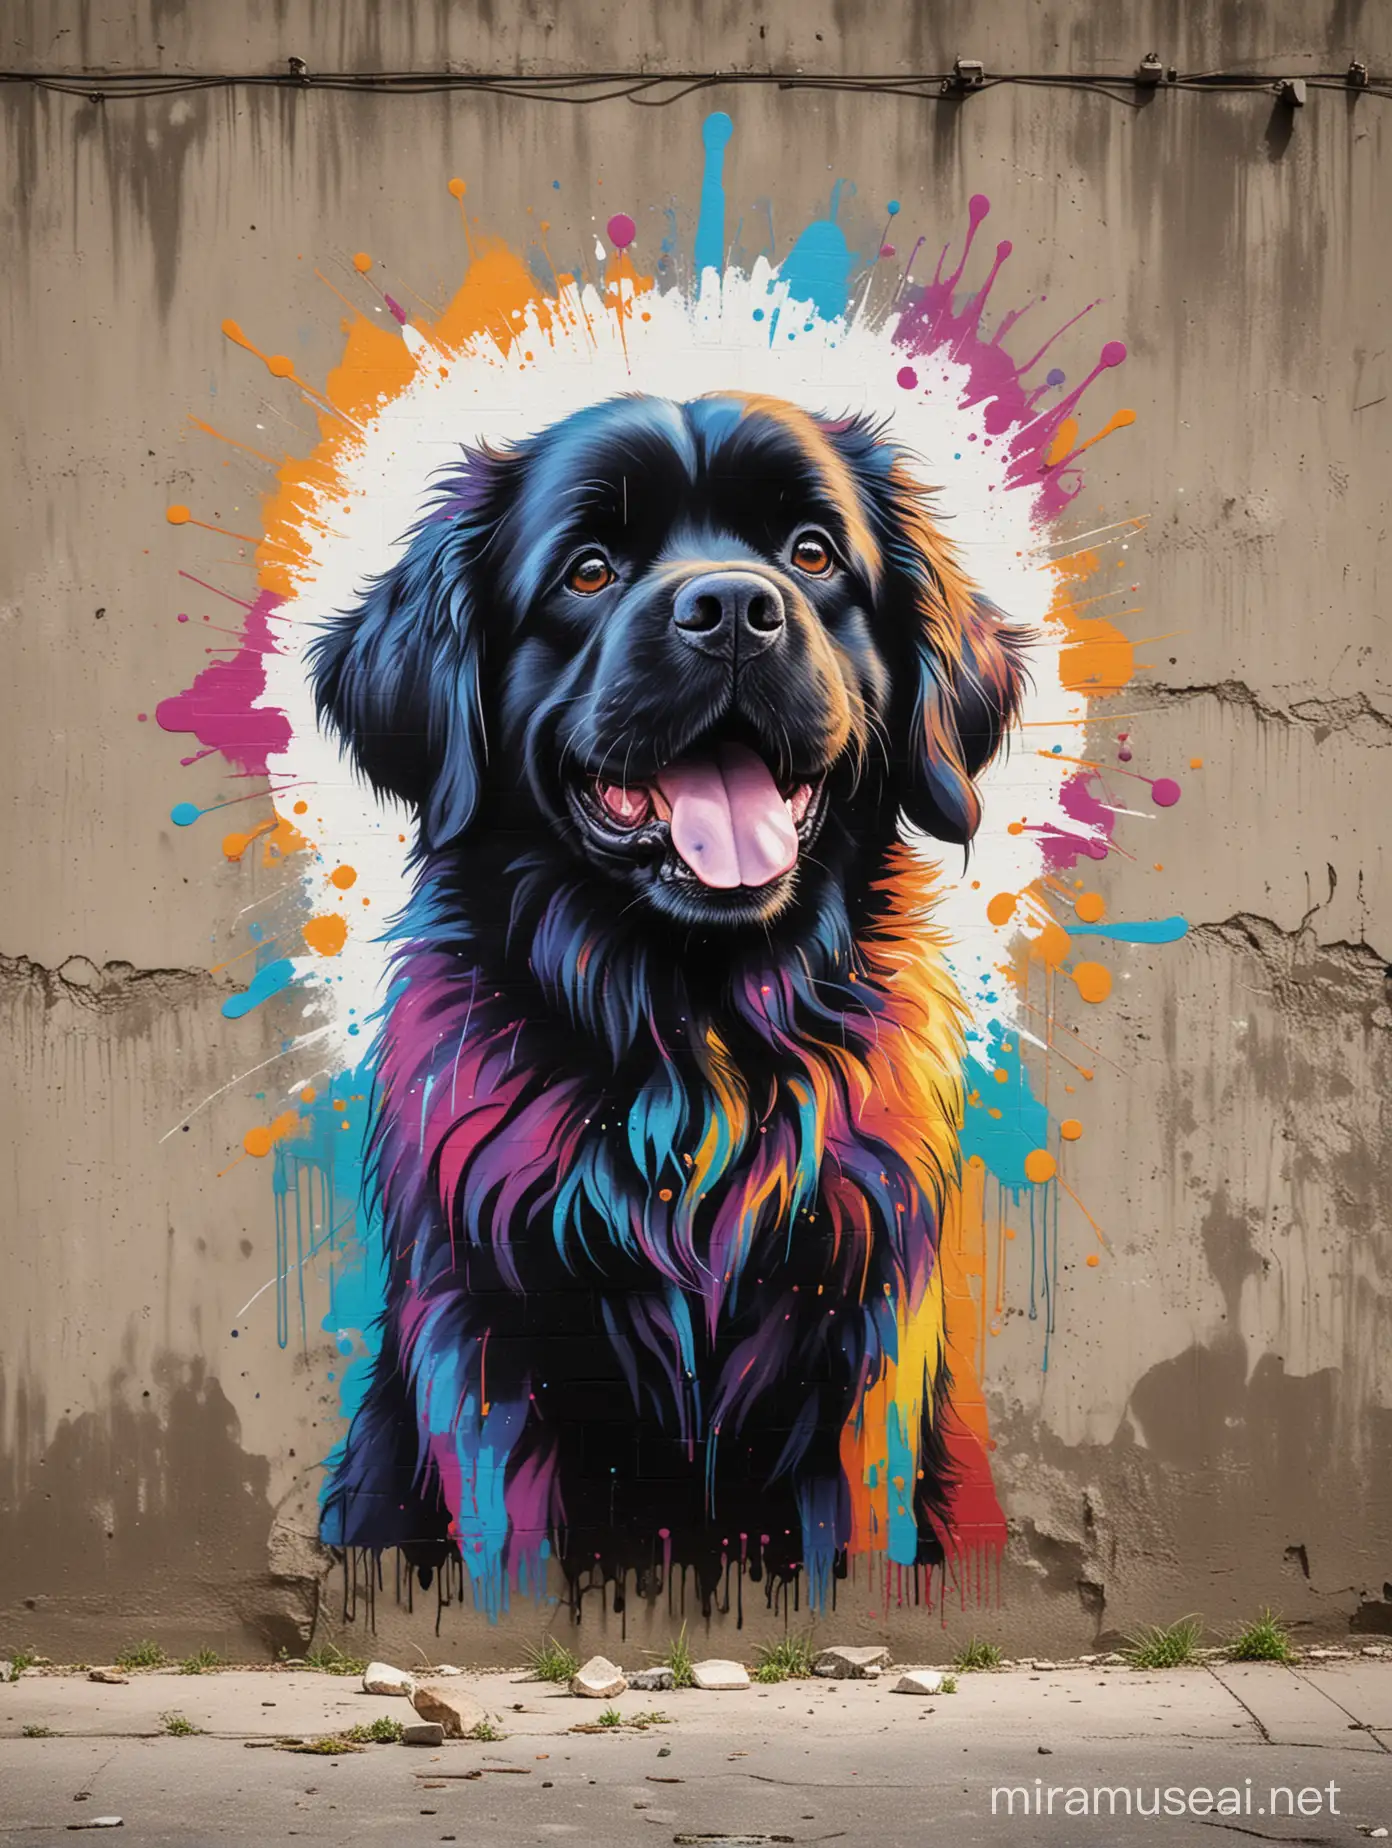 art movement focused on emotional impact through free-flowing shapes and colors, often without depicting real objects,
Create a graffiti of a tiny happy Newfoundland dog on the foreground, colorful graffiti art, on a wall, rustic background, graffiti art style